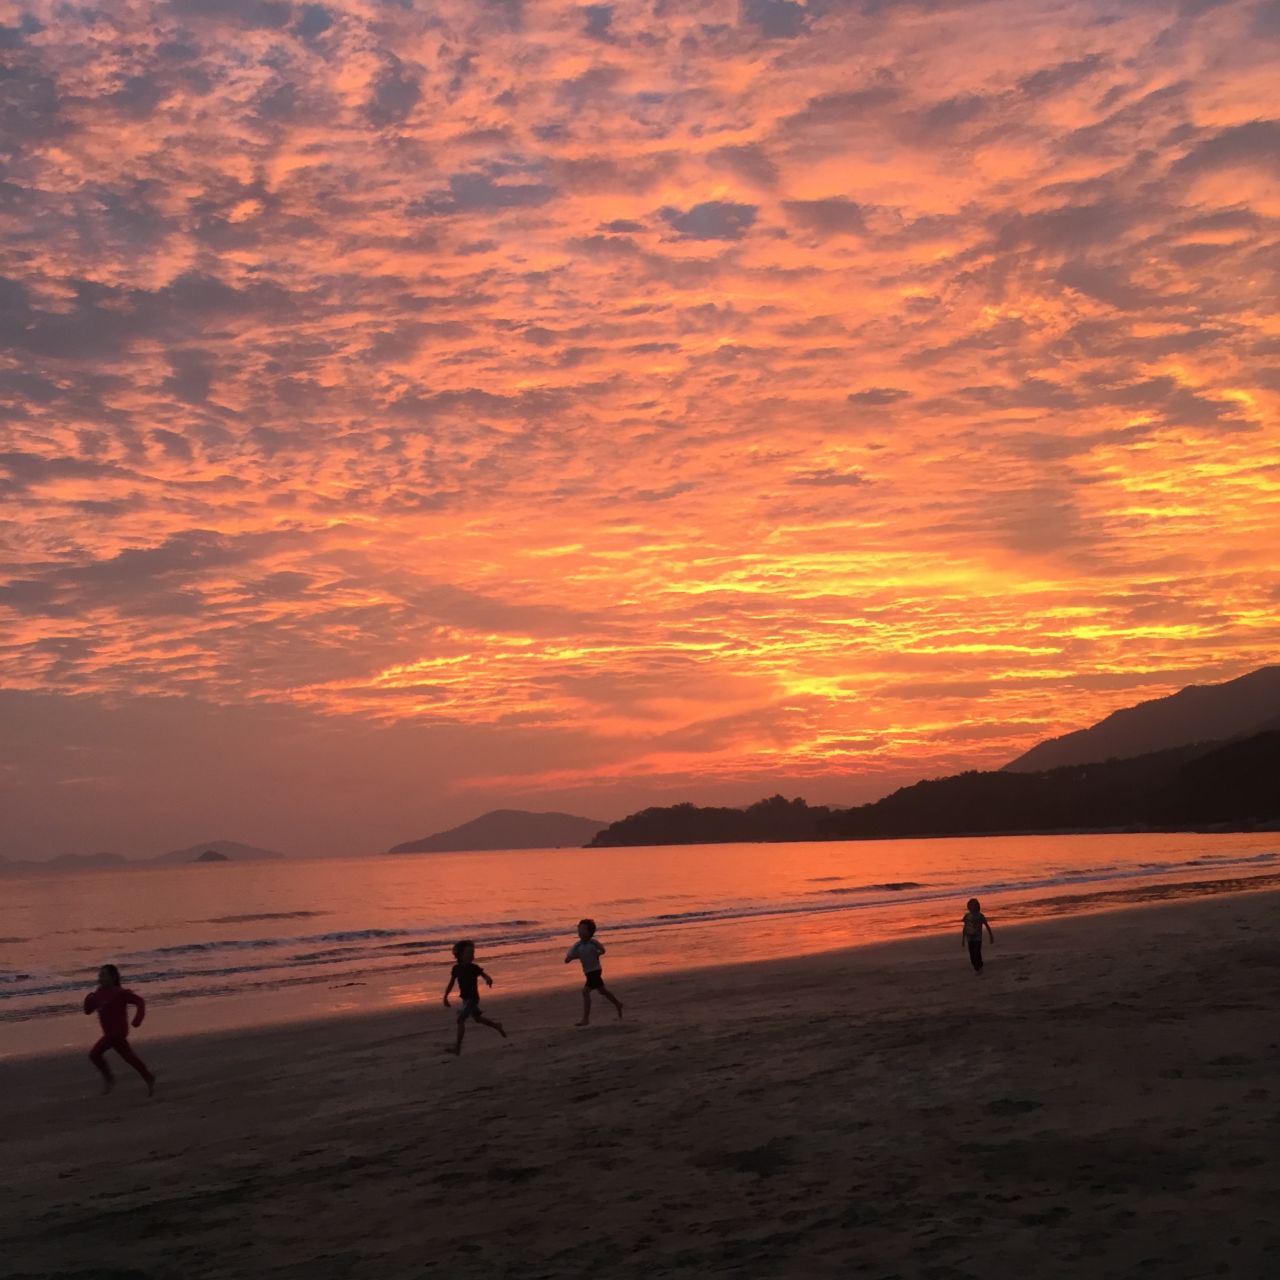 <strong>Pui O:</strong> In addition to its kayaking, surfing and beach shacks, Lantau's Pui O is also home to amazing sunsets. 